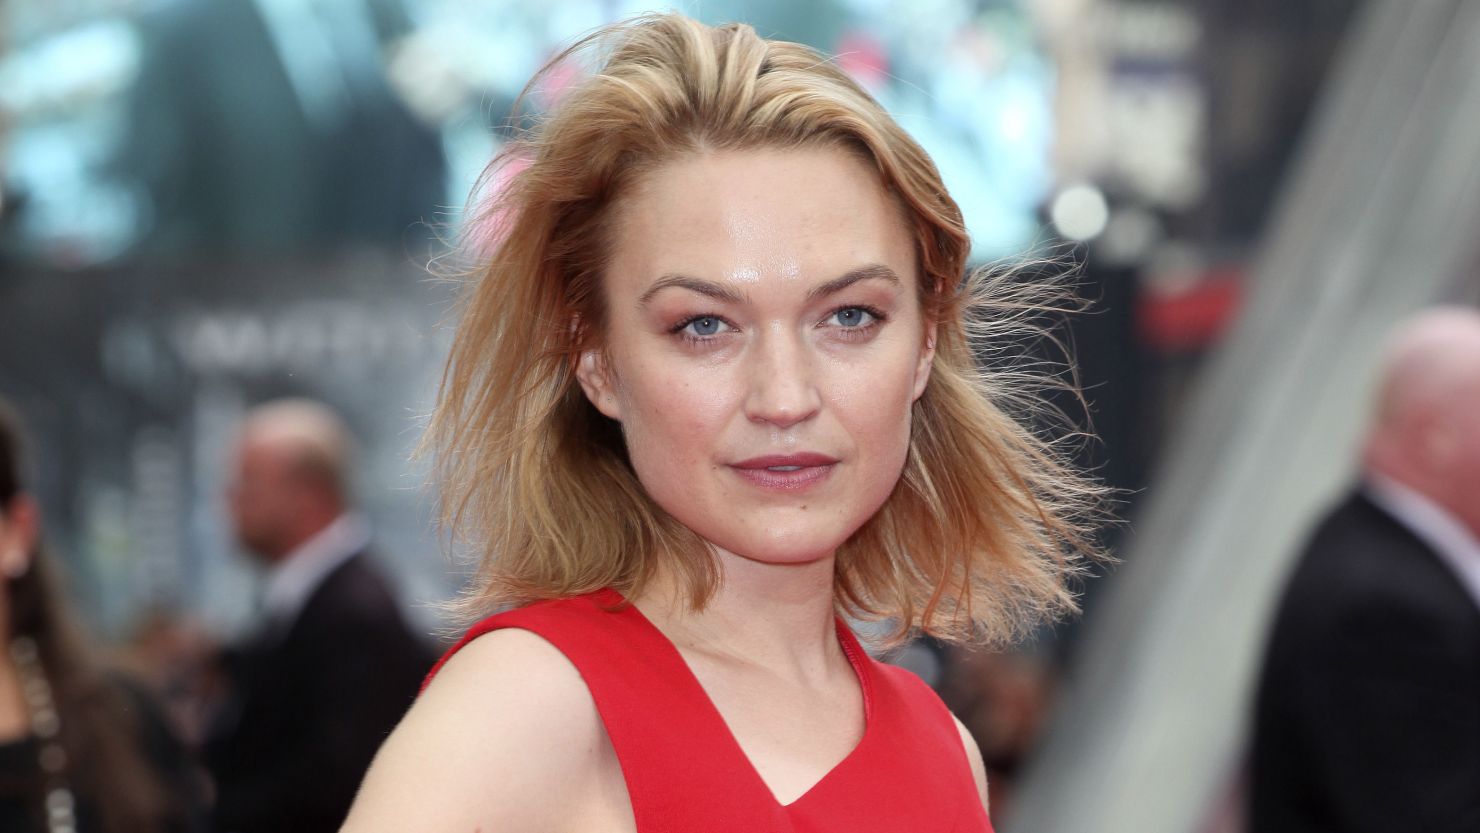 Sophia Myles had been using social media to keep her followers updated on her father's health. 